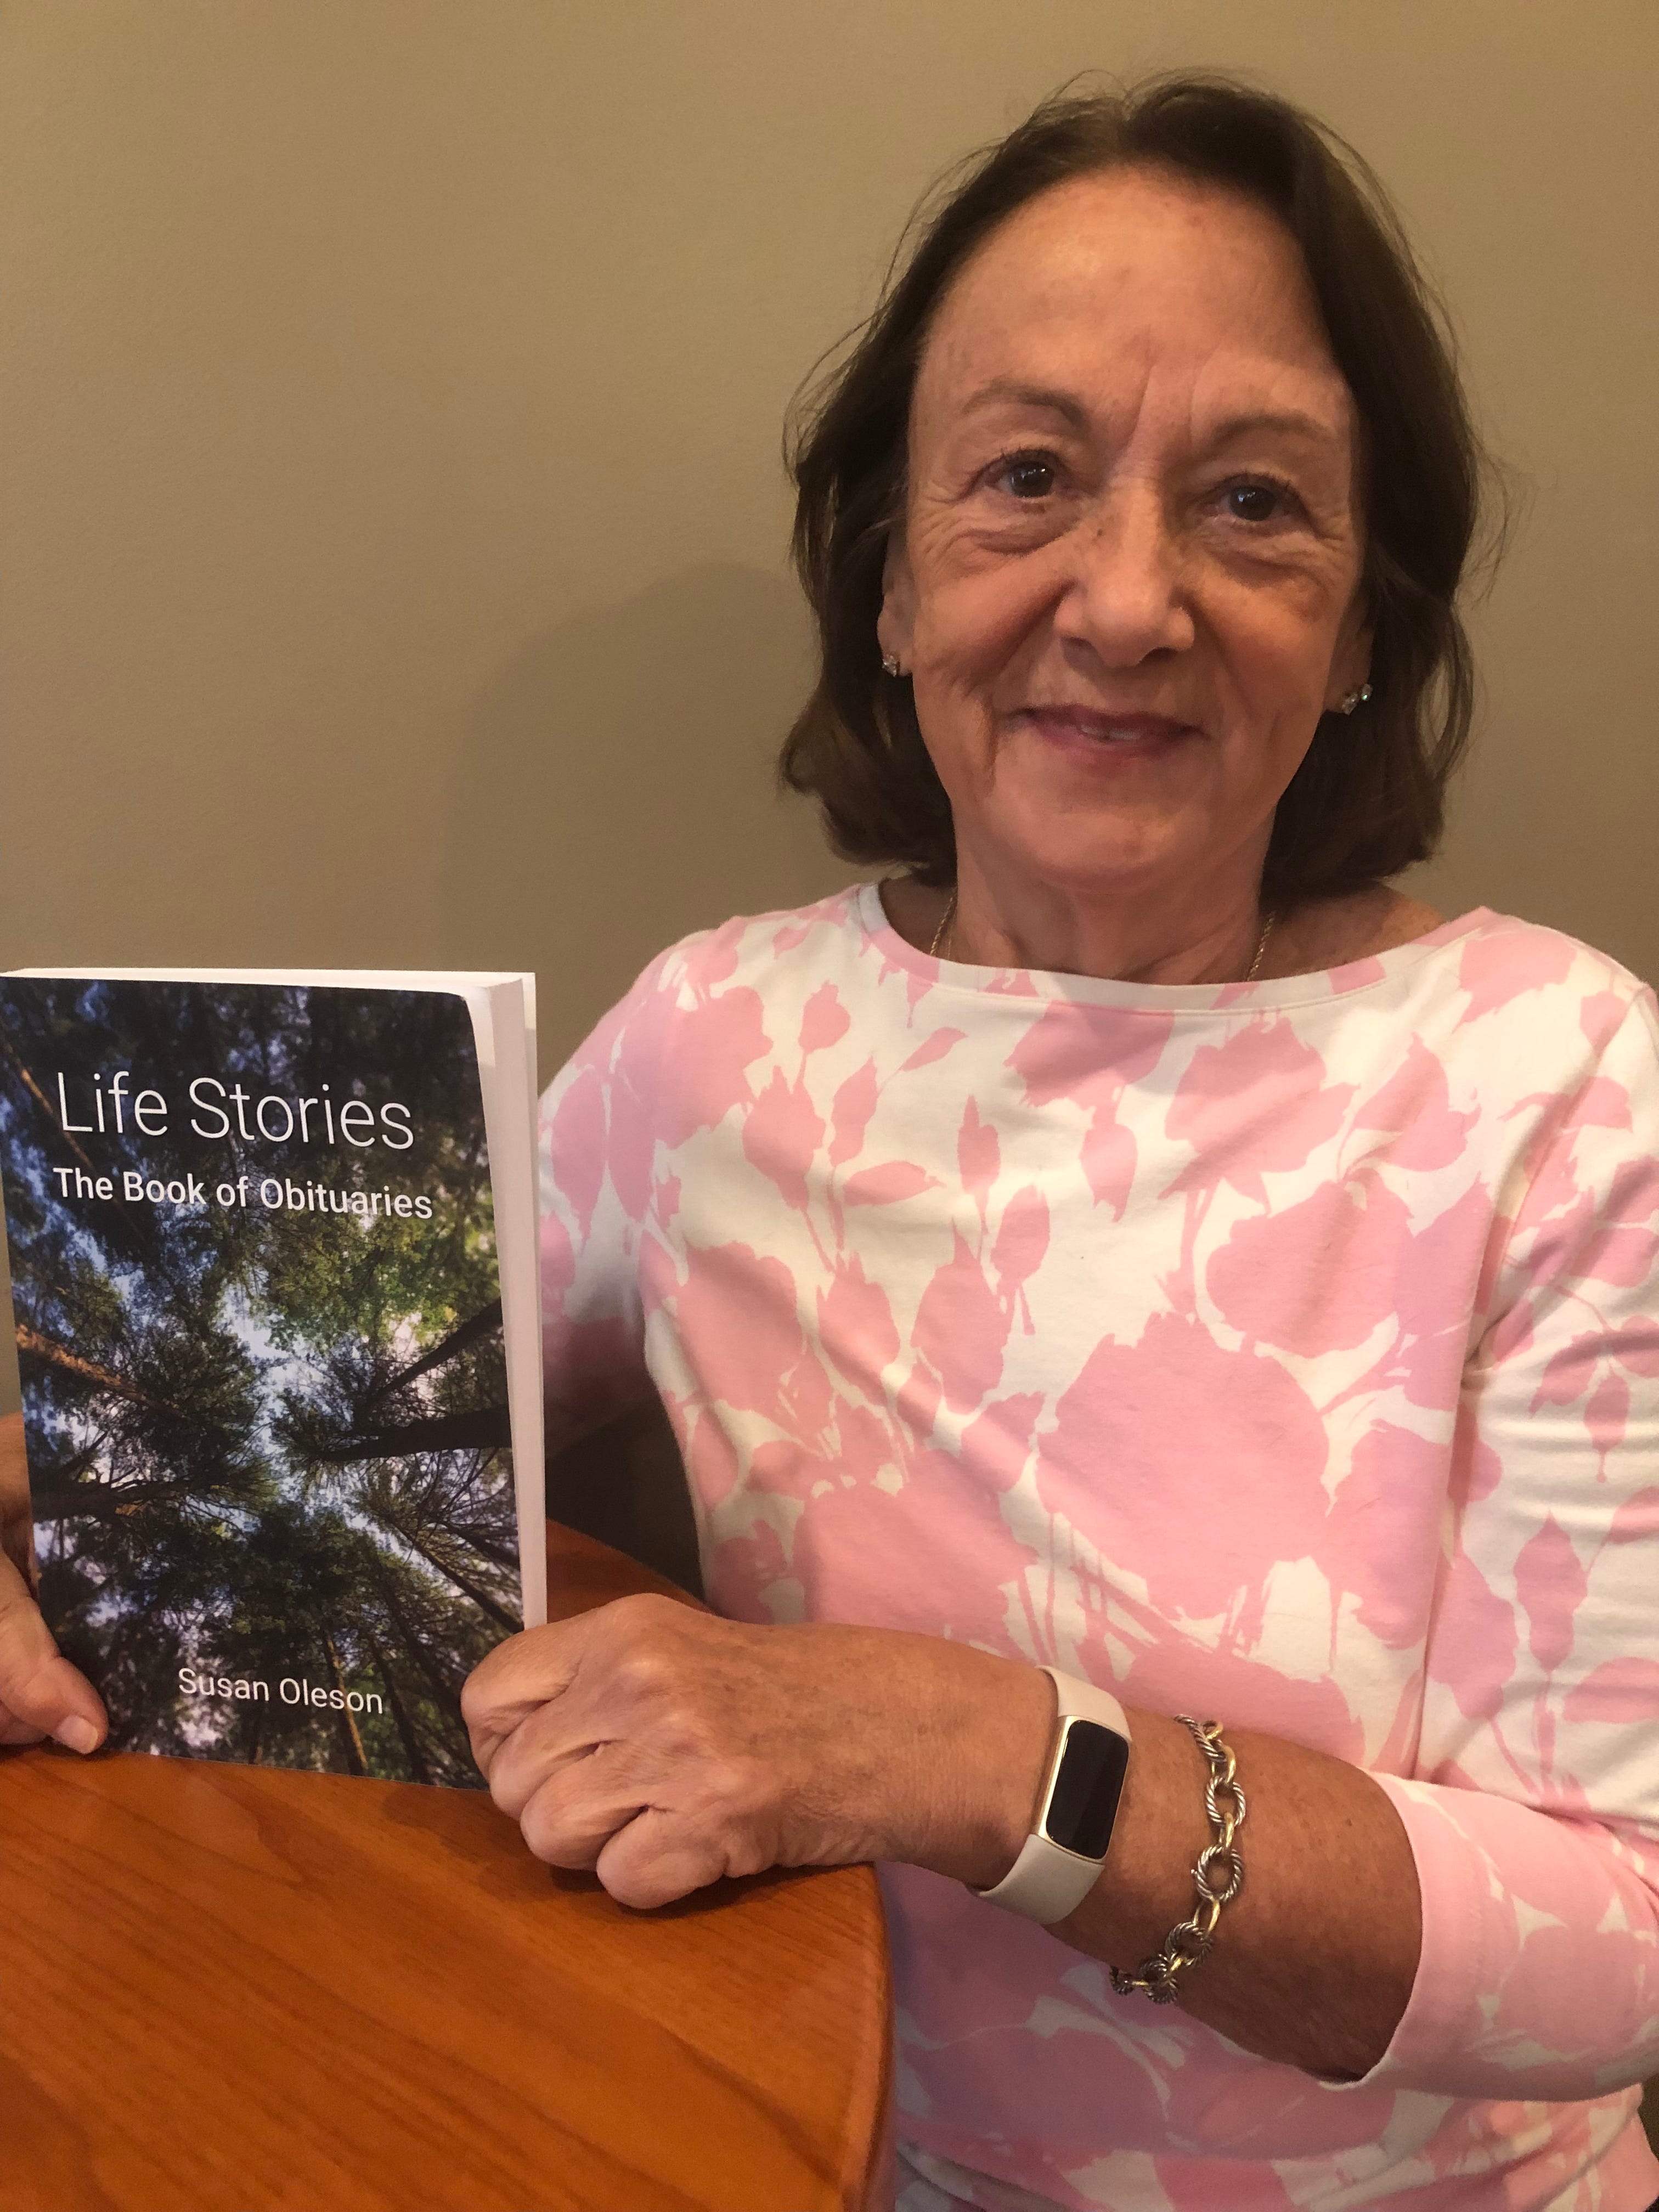 Ways of Life: Celebrating life with a book about obituaries